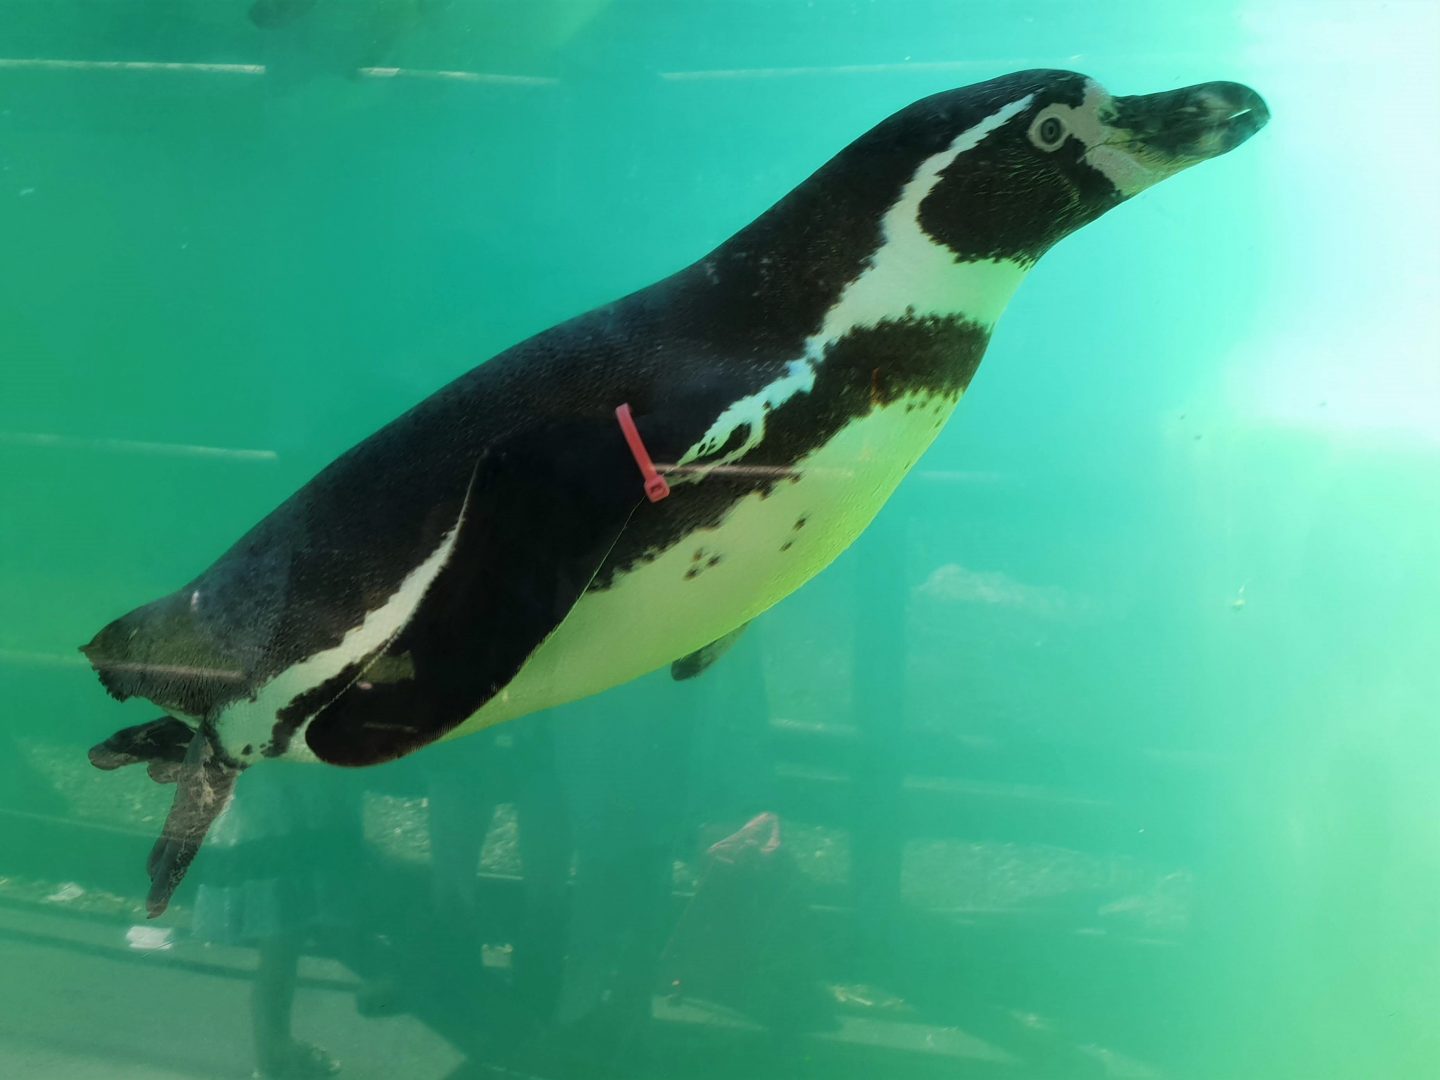 Humboldt penguin at Folly Farm, Pembrokeshire in Wales